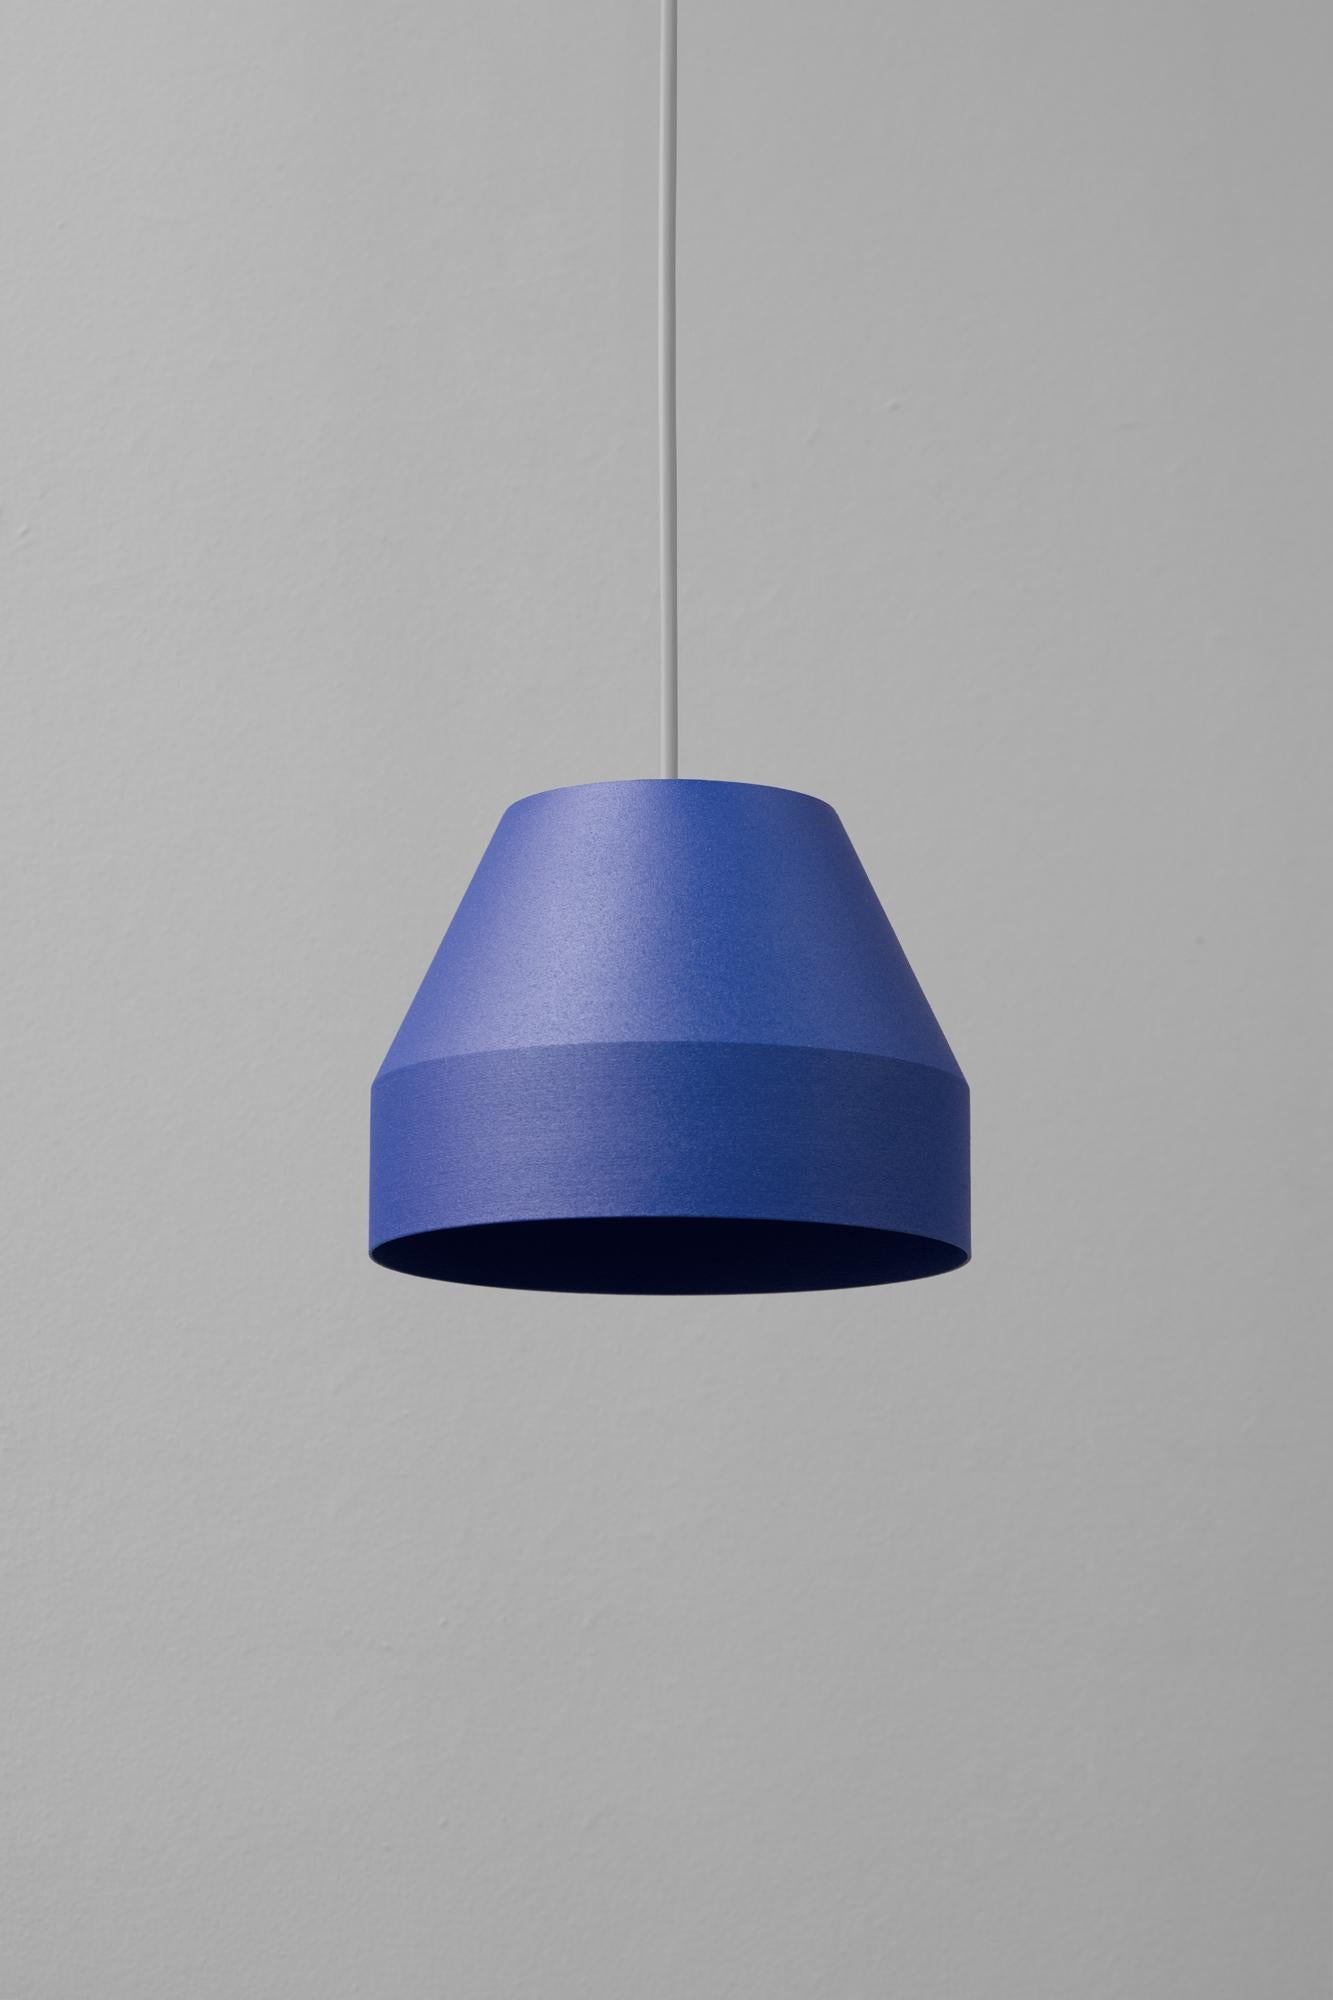 Small Ultra Blue Cap Pendant Lamp by +kouple
Dimensions: Ø 16 x H 12 cm. 
Materials: Powder-coated steel.

Available in different color options. The rod length is 200 cm. Please contact us.

All our lamps can be wired according to each country. If